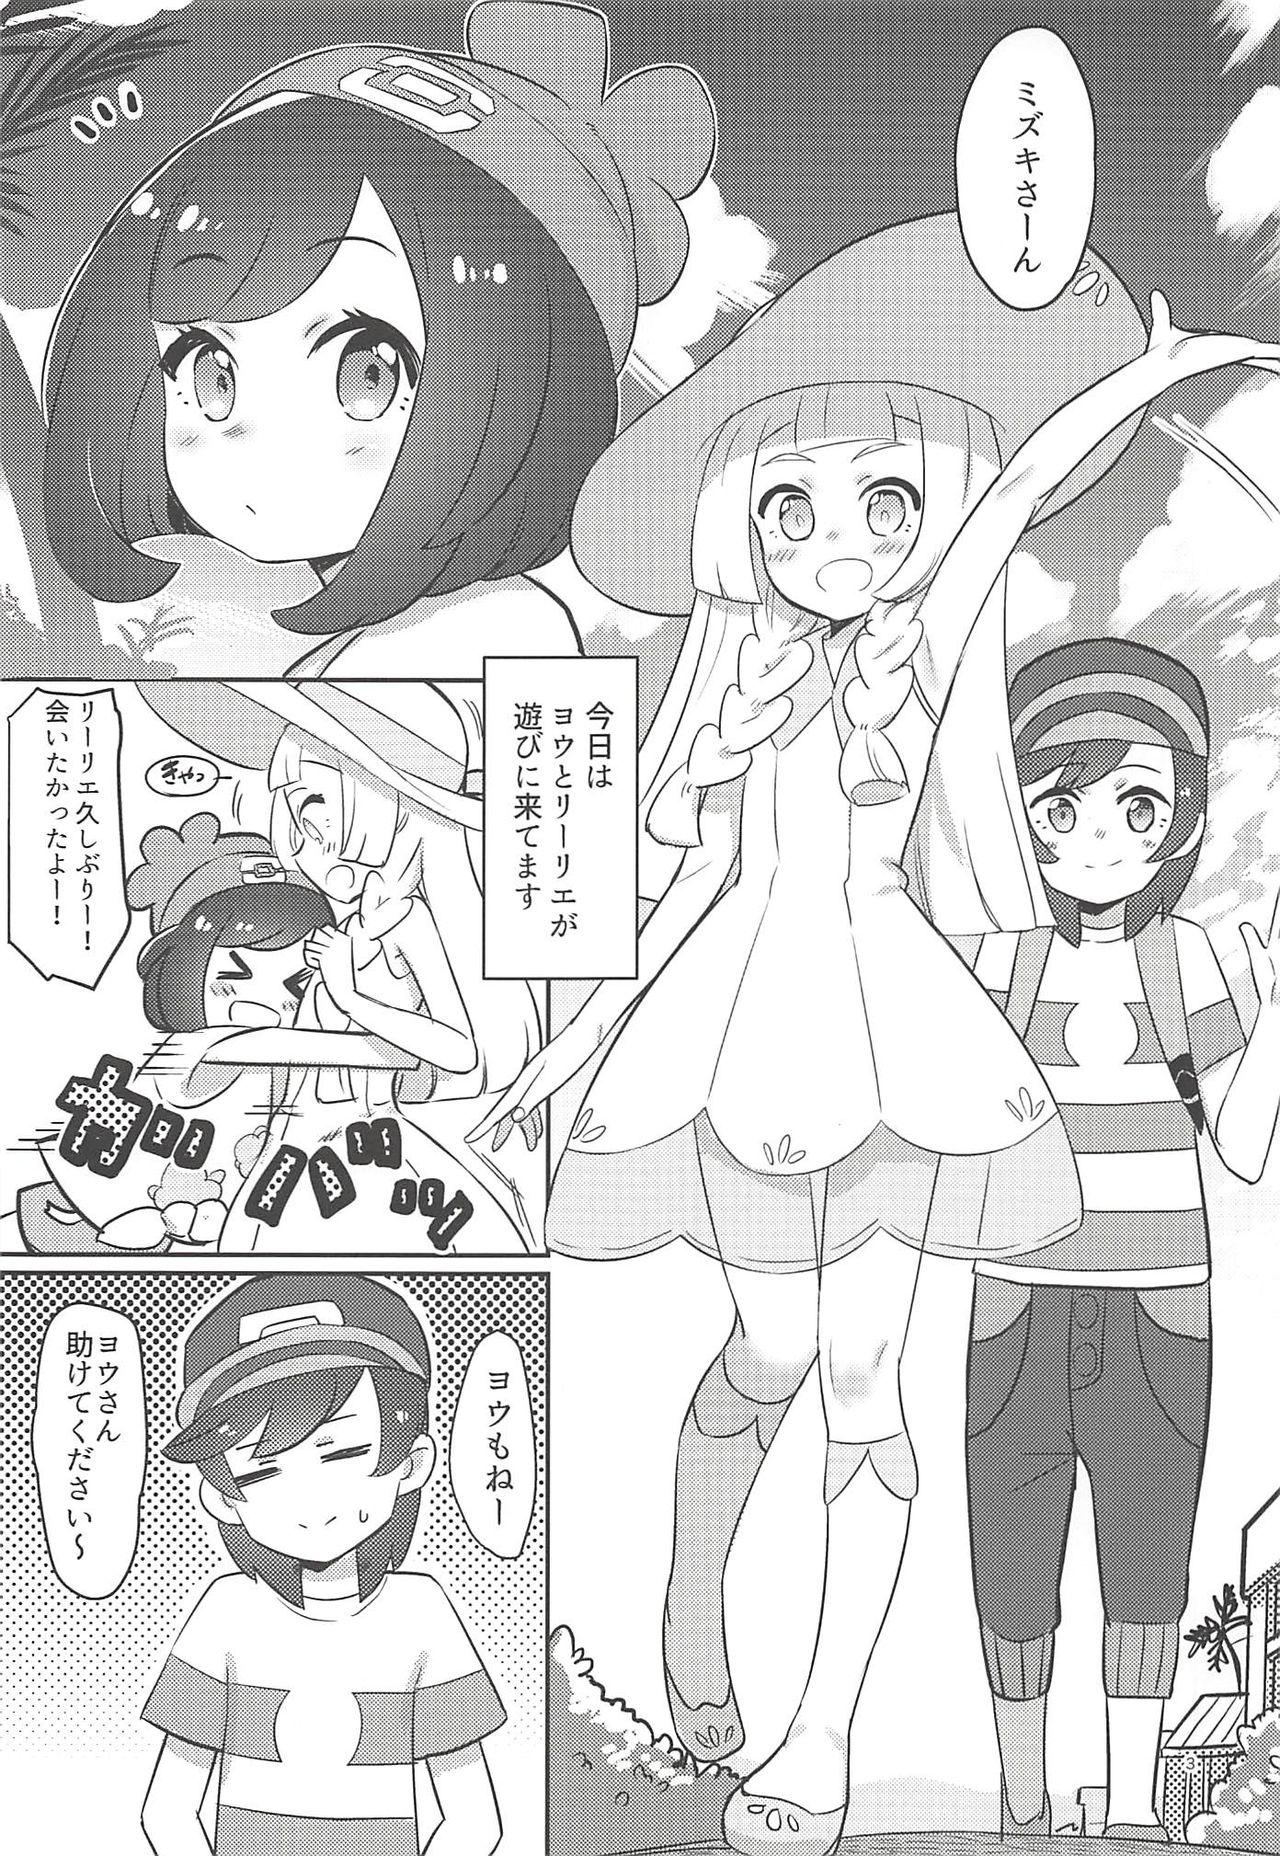 Squirting Oshiete Lillie - Pokemon Tongue - Page 2